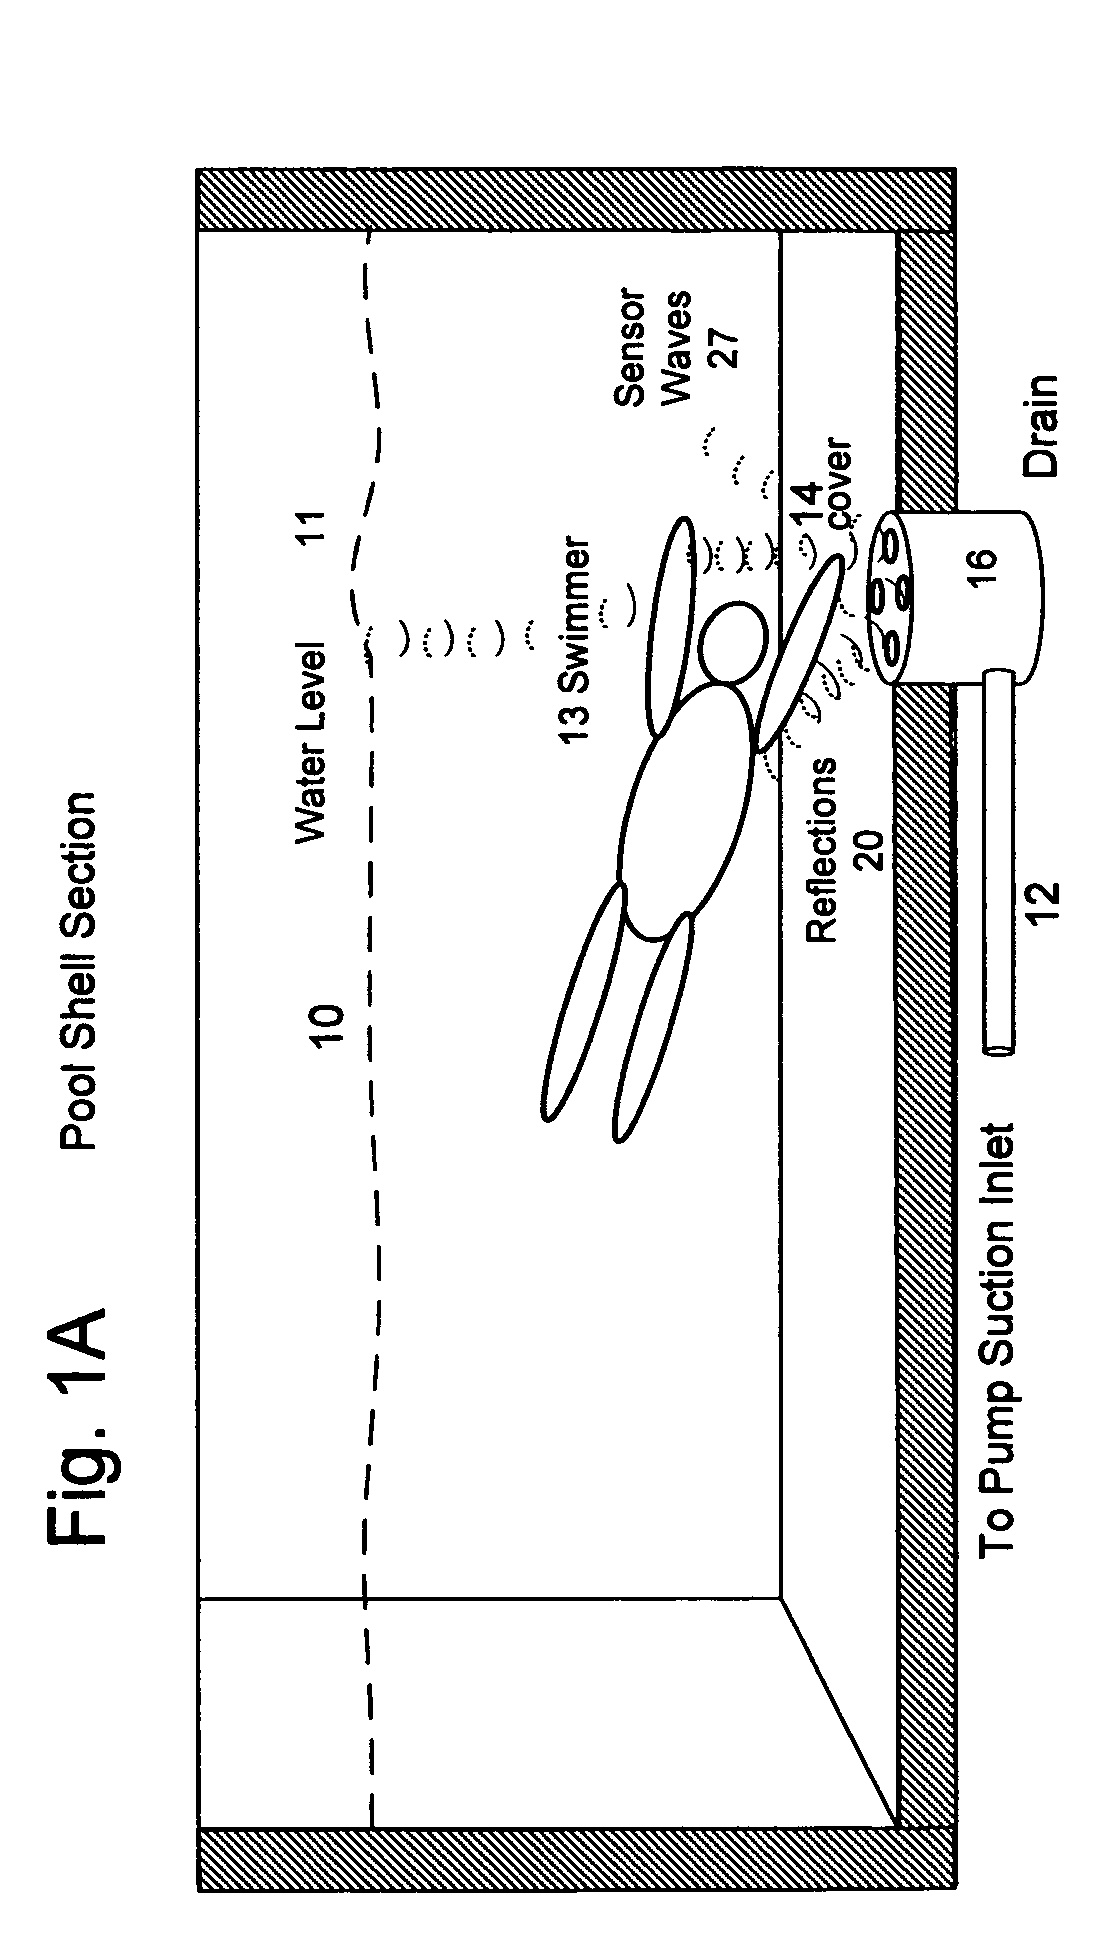 Machine and method for proactive sensing and intervention to preclude swimmer entrapment, entanglement or evisceration